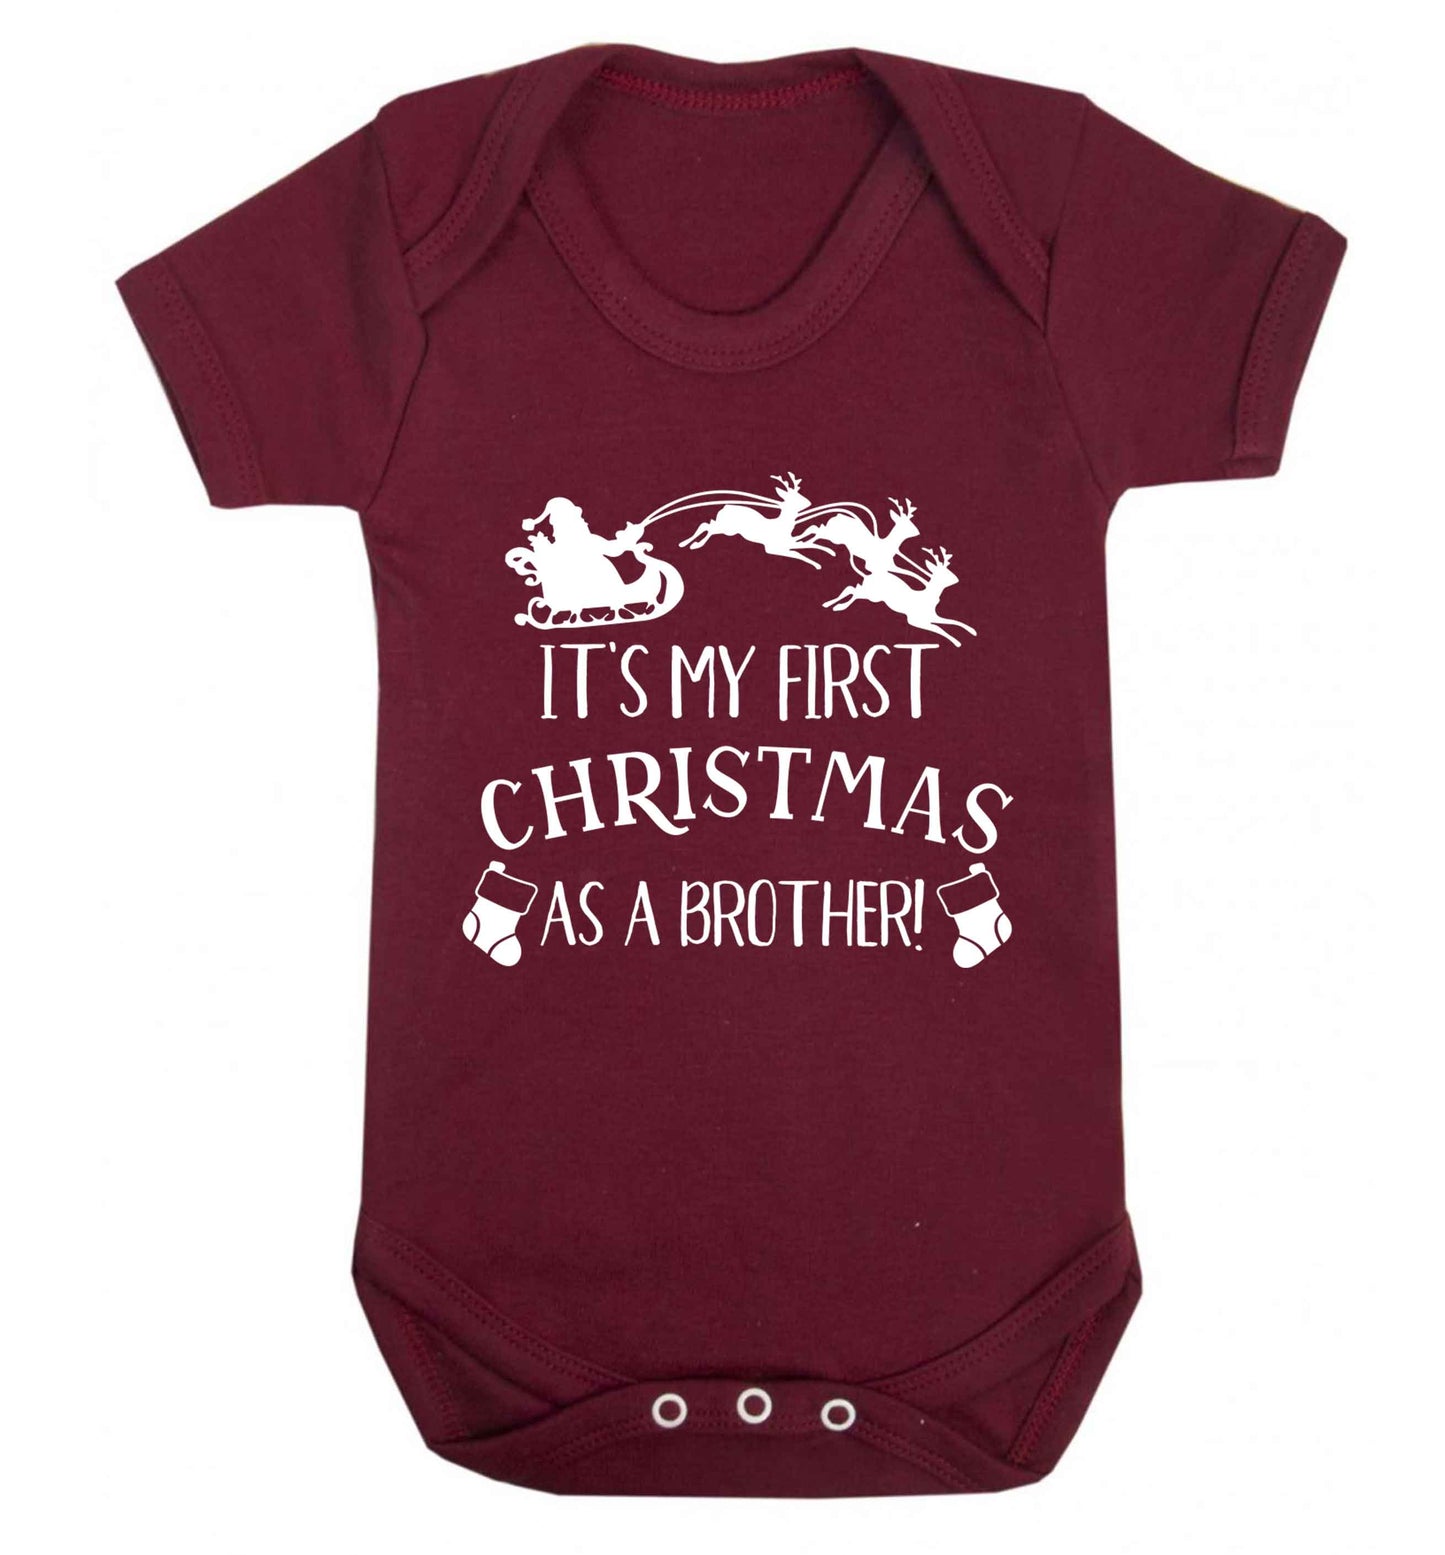 It's my first Christmas as a brother! Baby Vest maroon 18-24 months